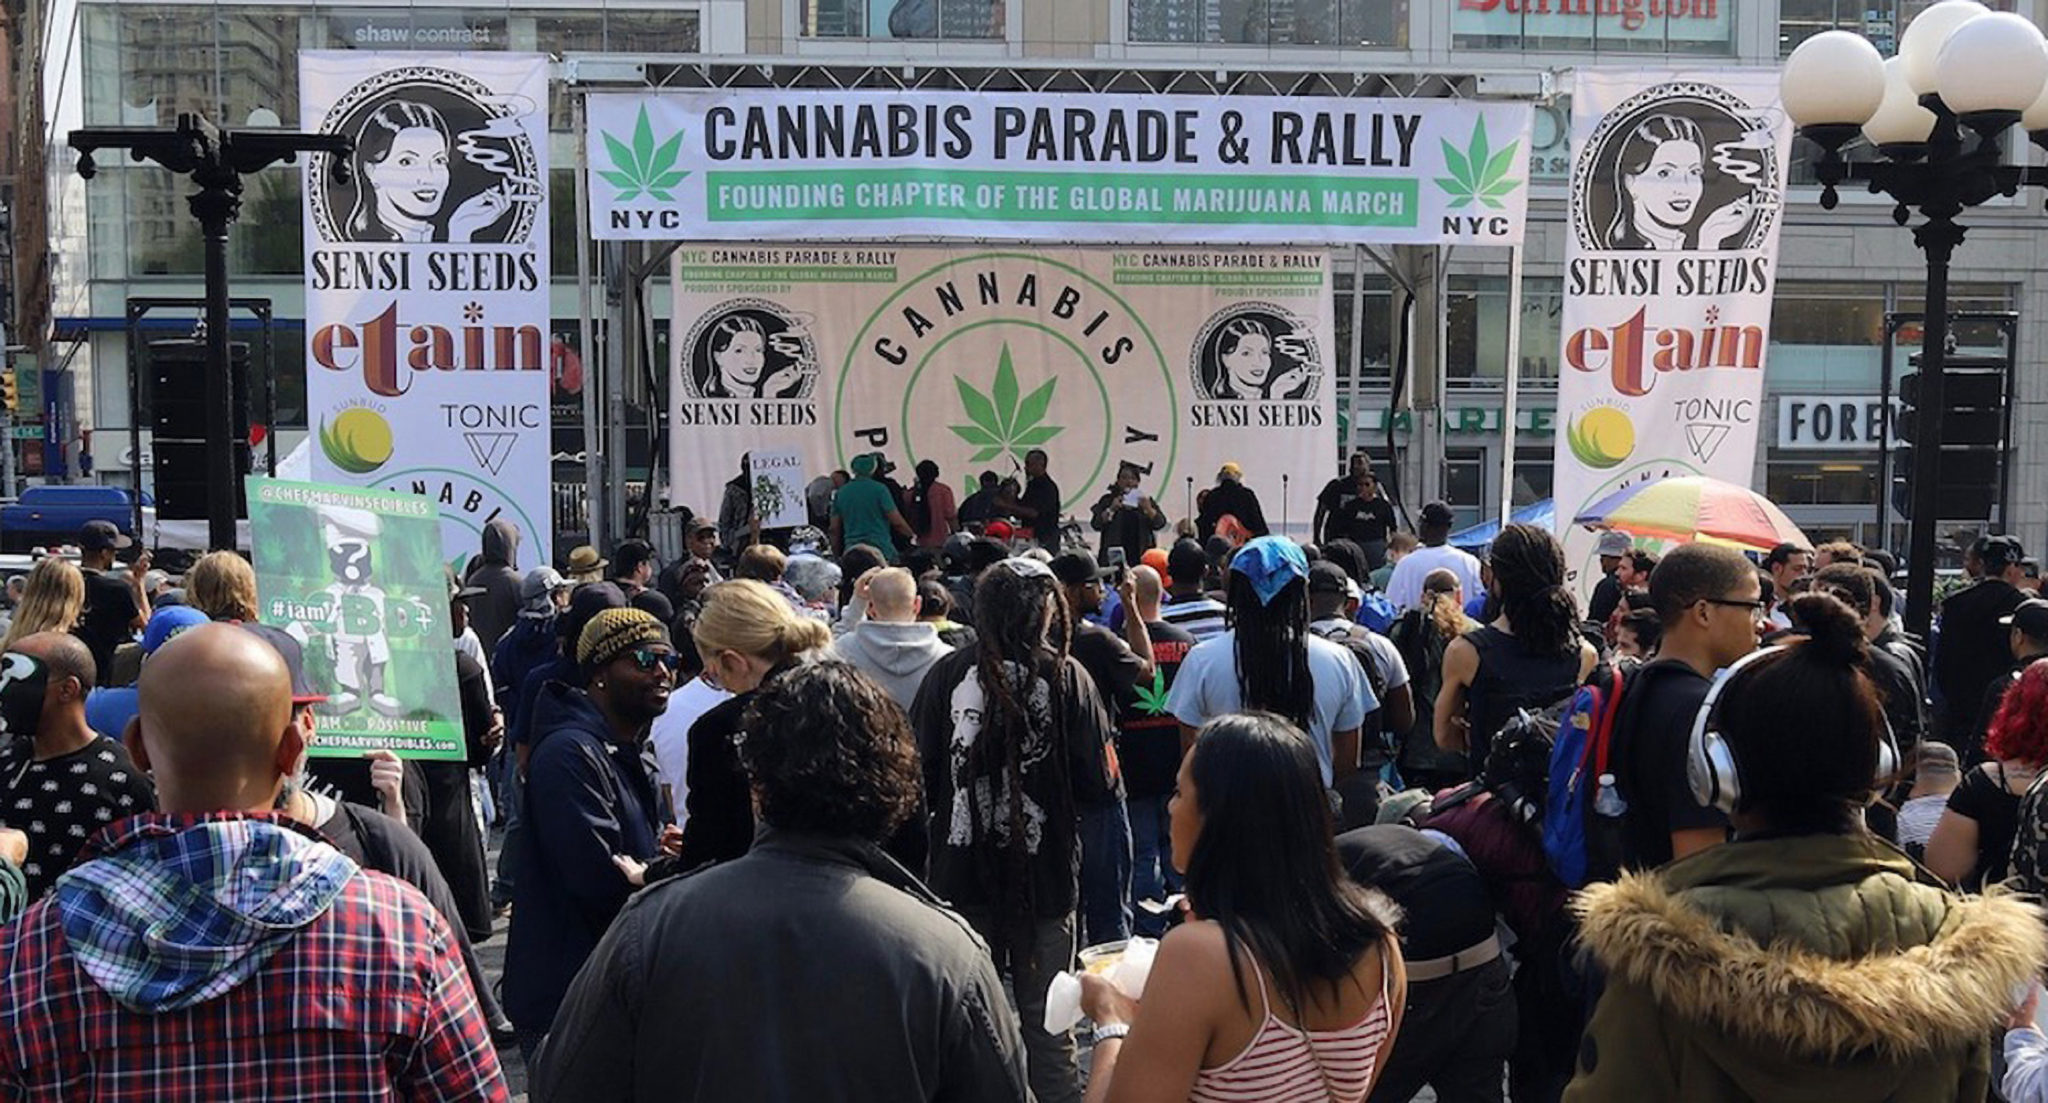 NYC Cannabis Parade All About the Next & Past Editions! Sensi Seeds